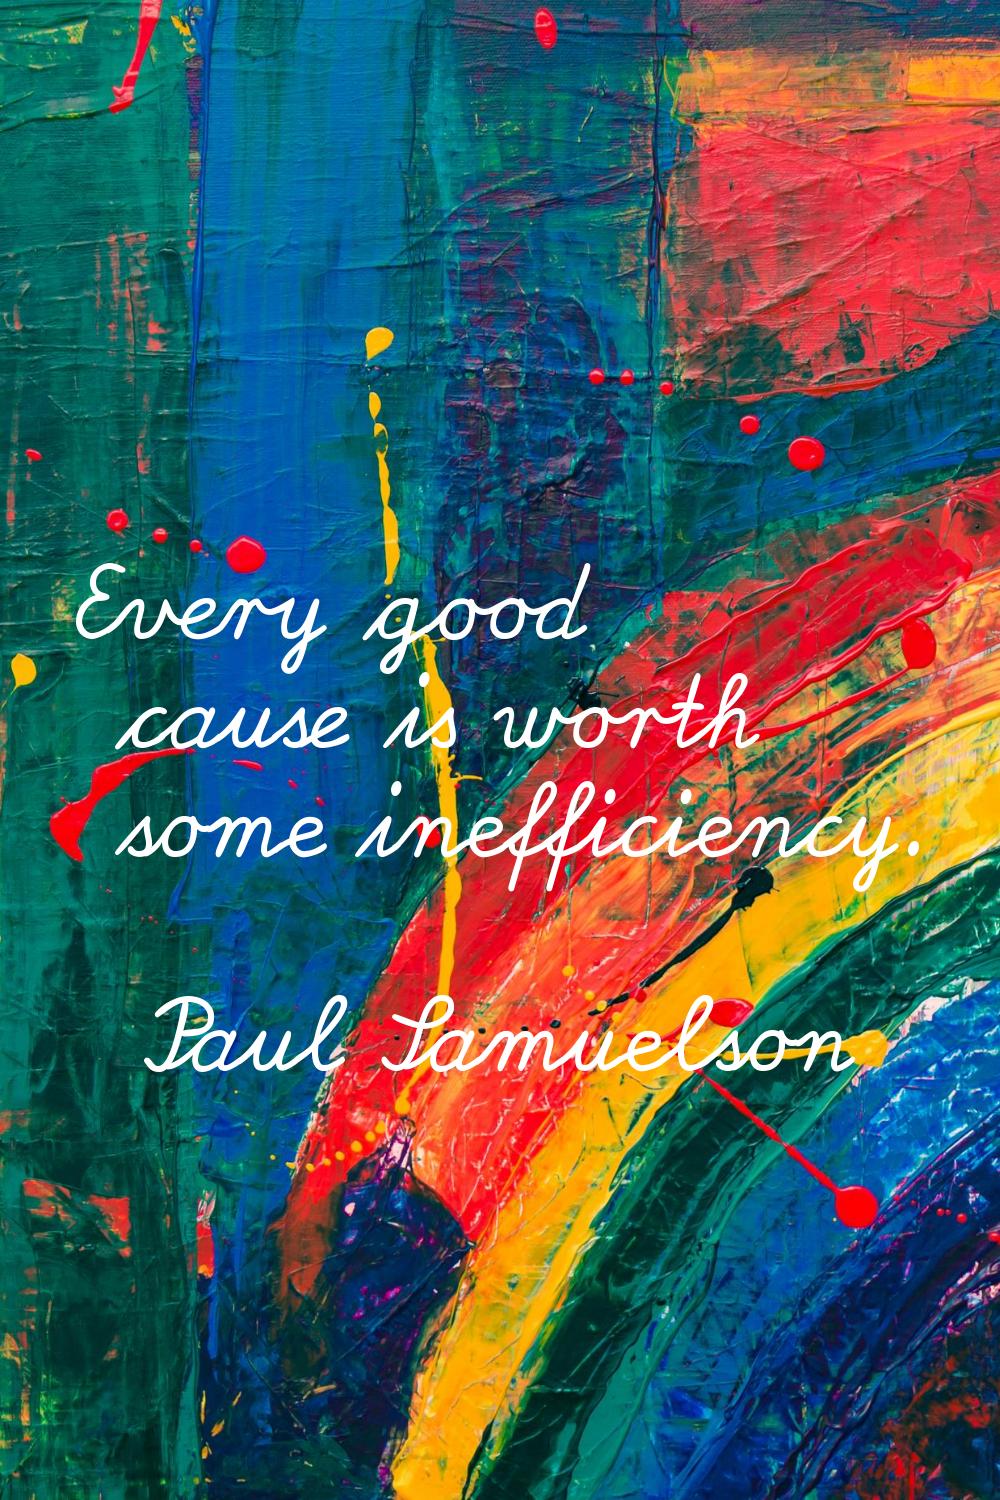 Every good cause is worth some inefficiency.